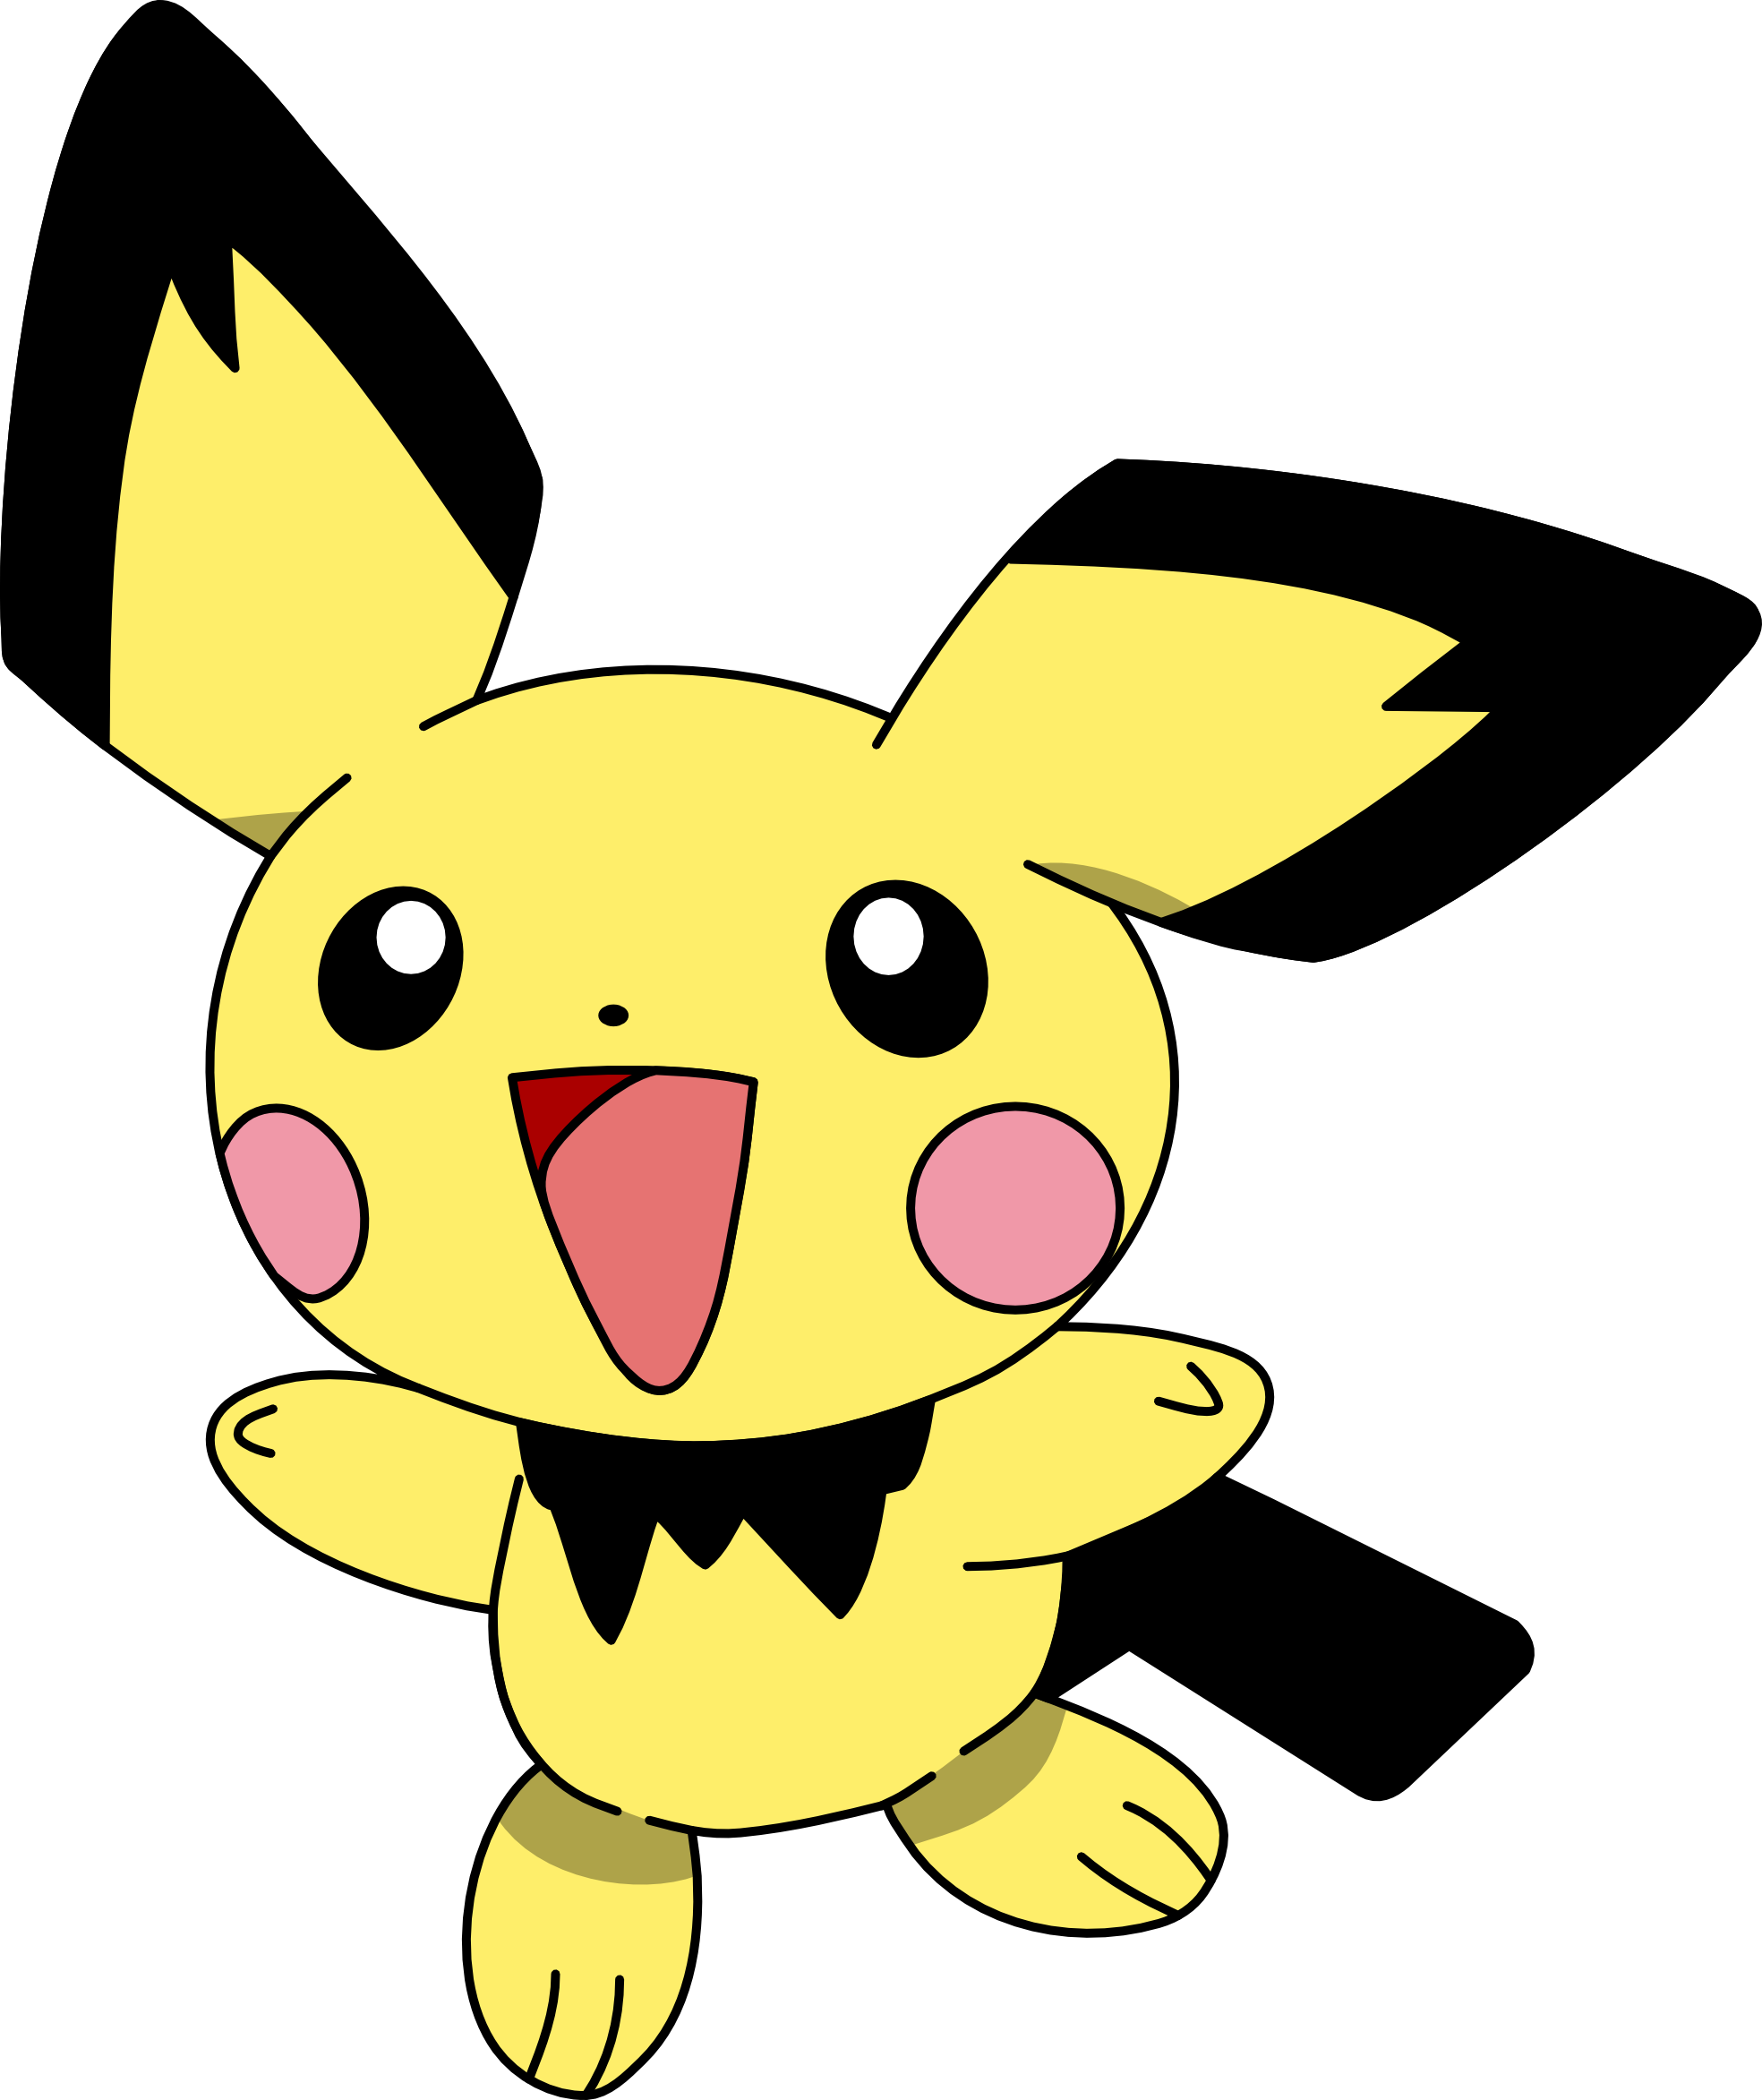 pichu_by_mighty355-d7cwjv7.png